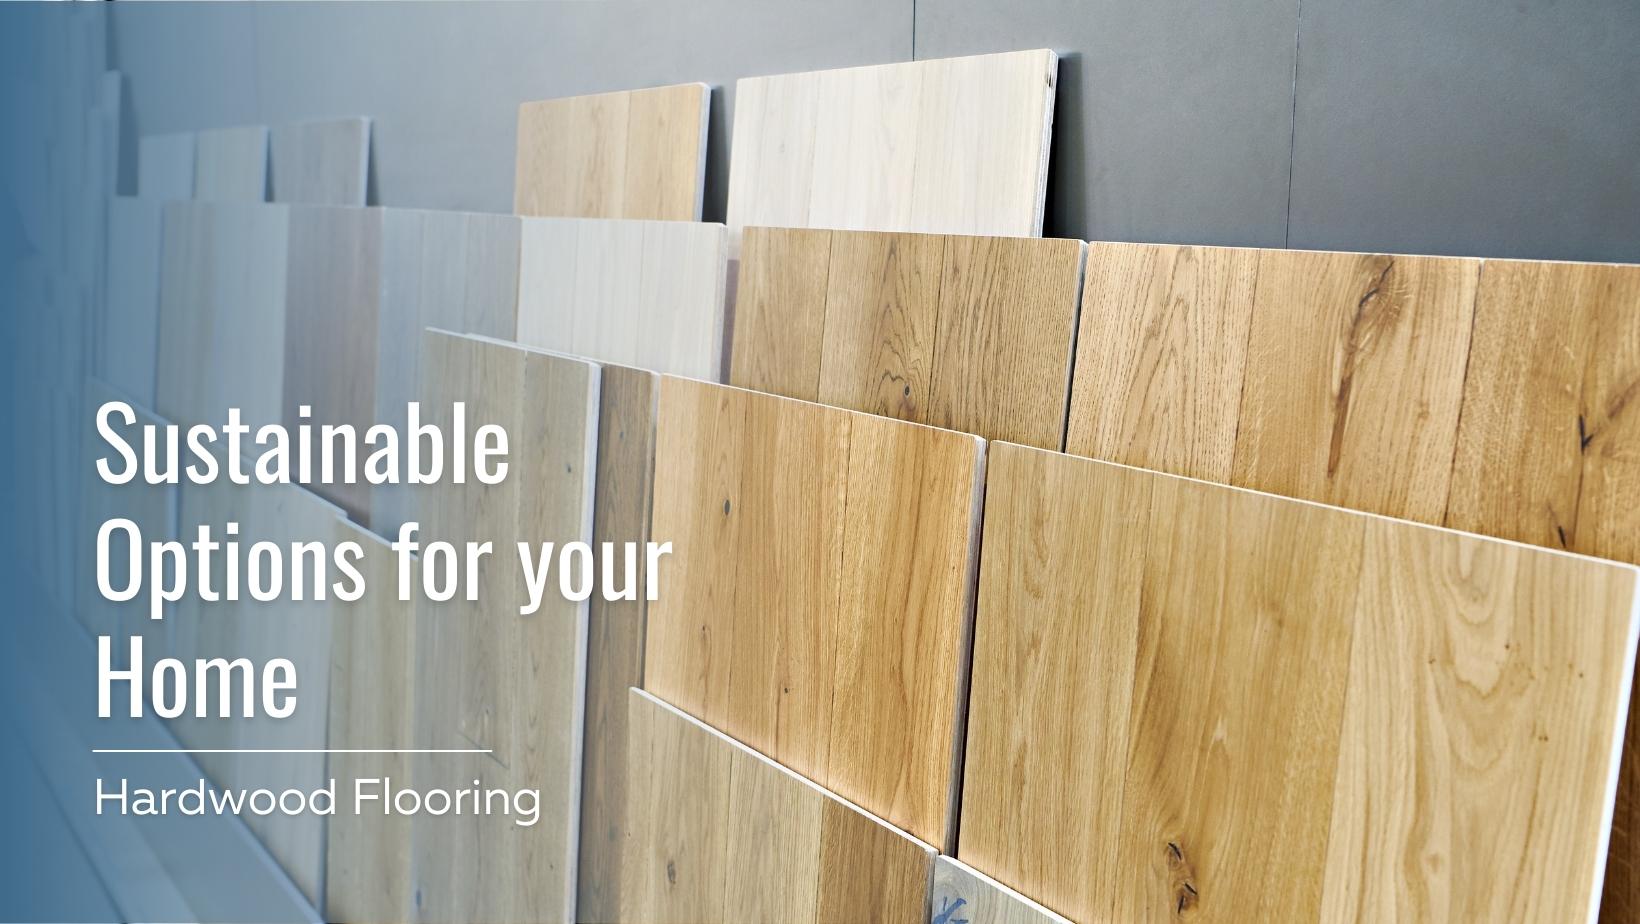 Sustainable Options for your Home Hardwood Flooring